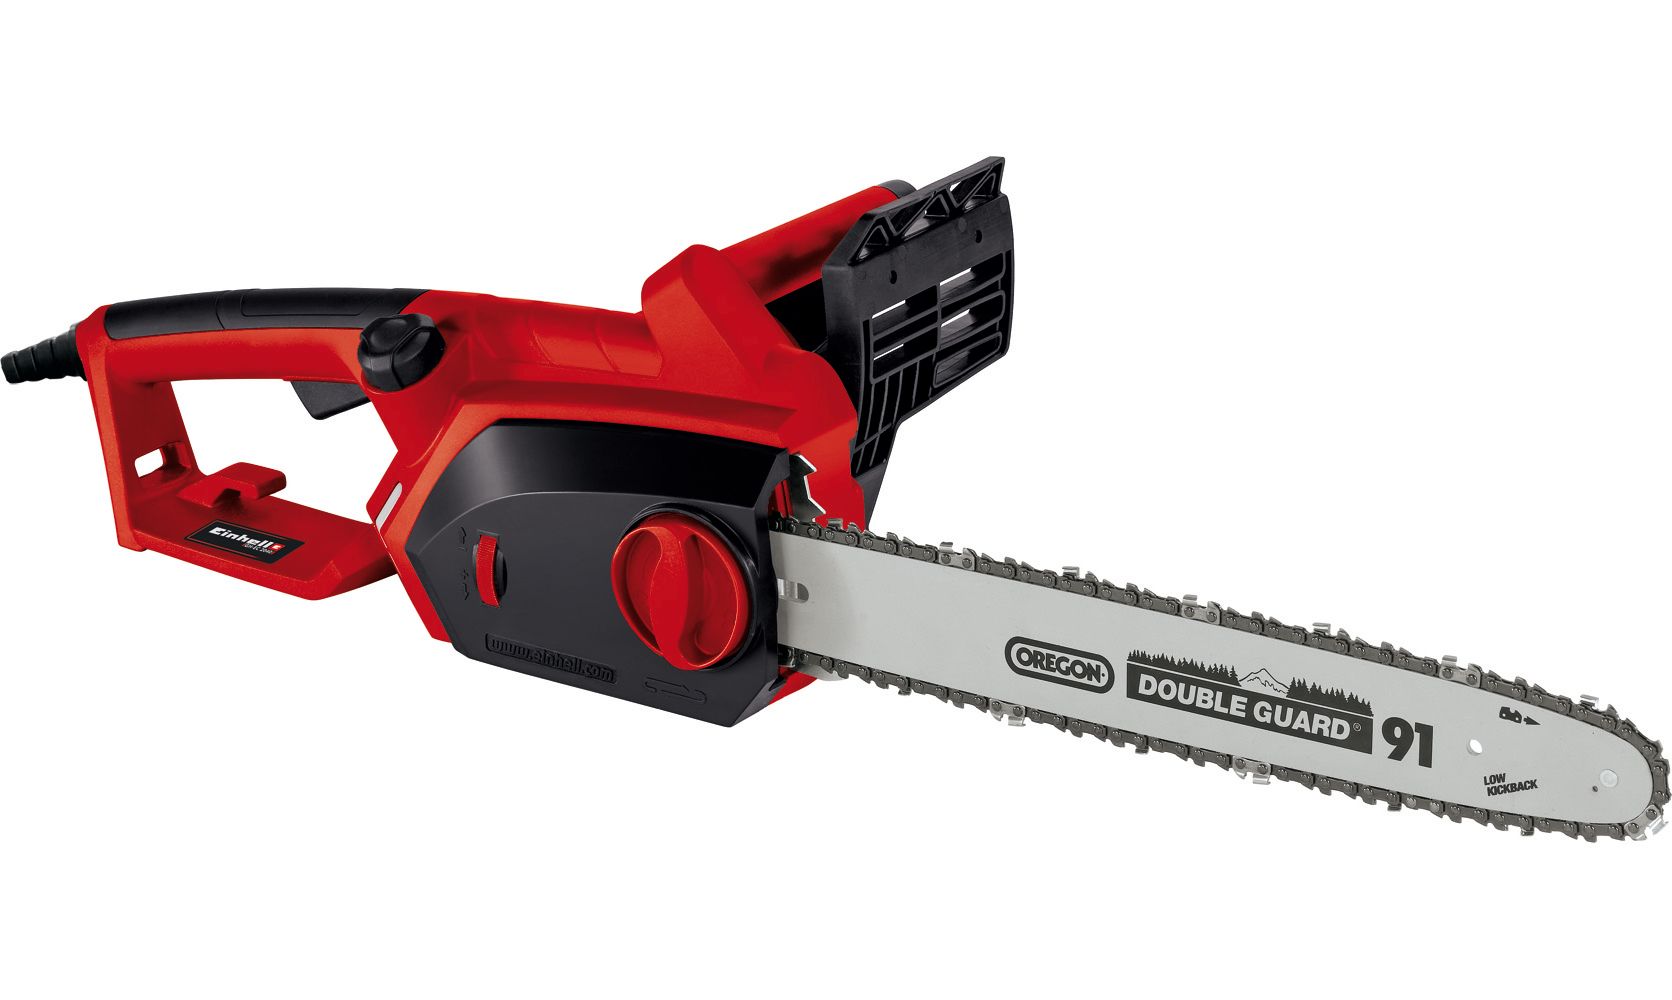 Image of Einhell GH-EC 2040 Electric Corded Chainsaw